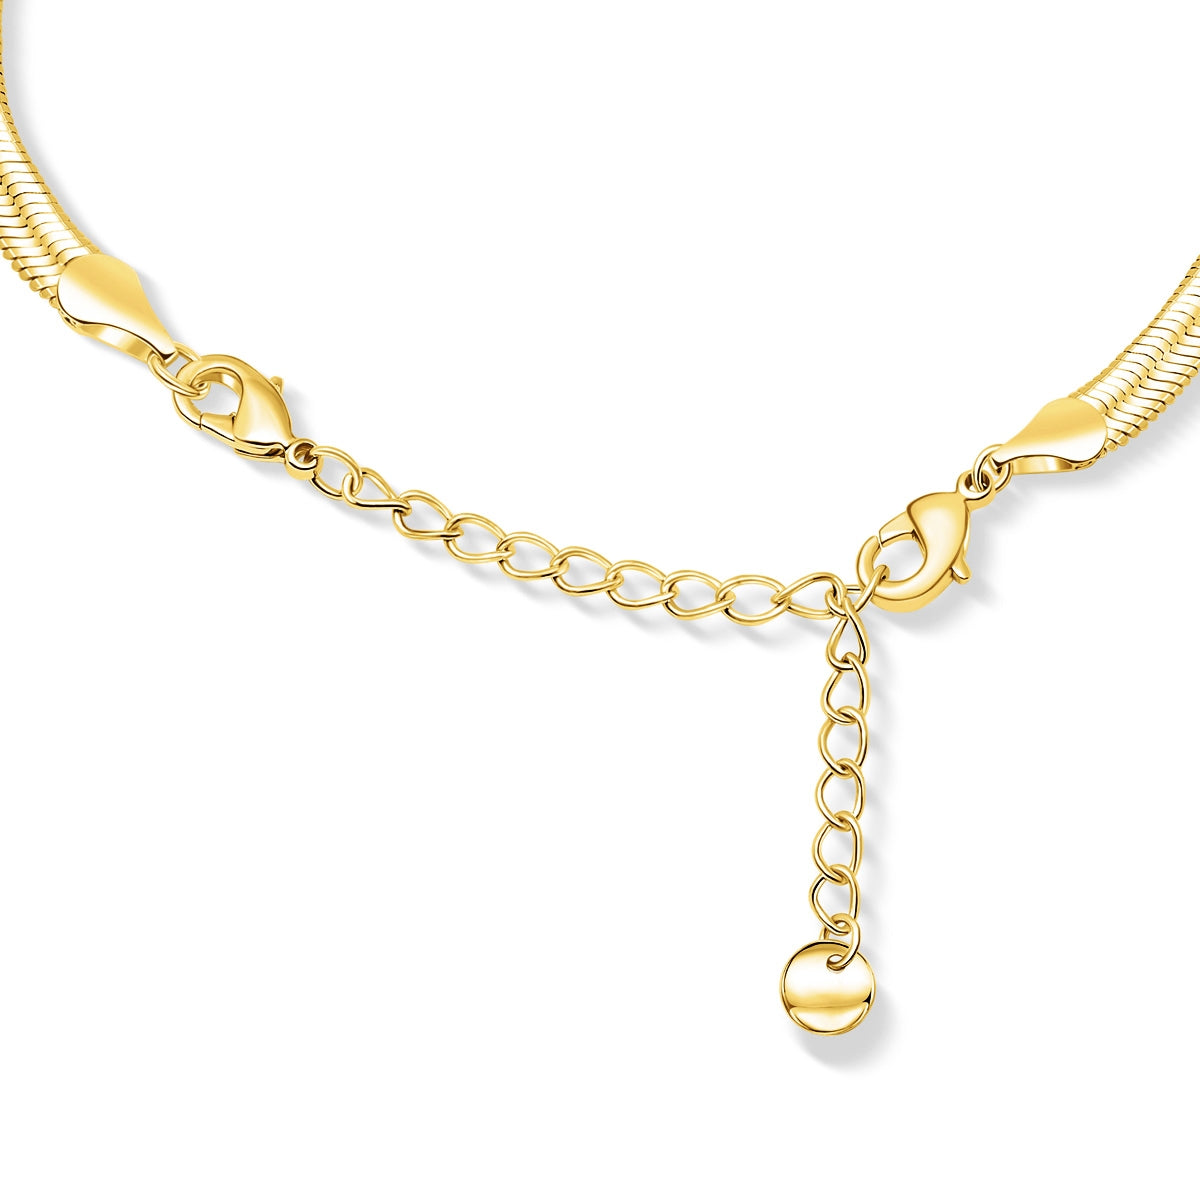 Gold necklace extender clasp